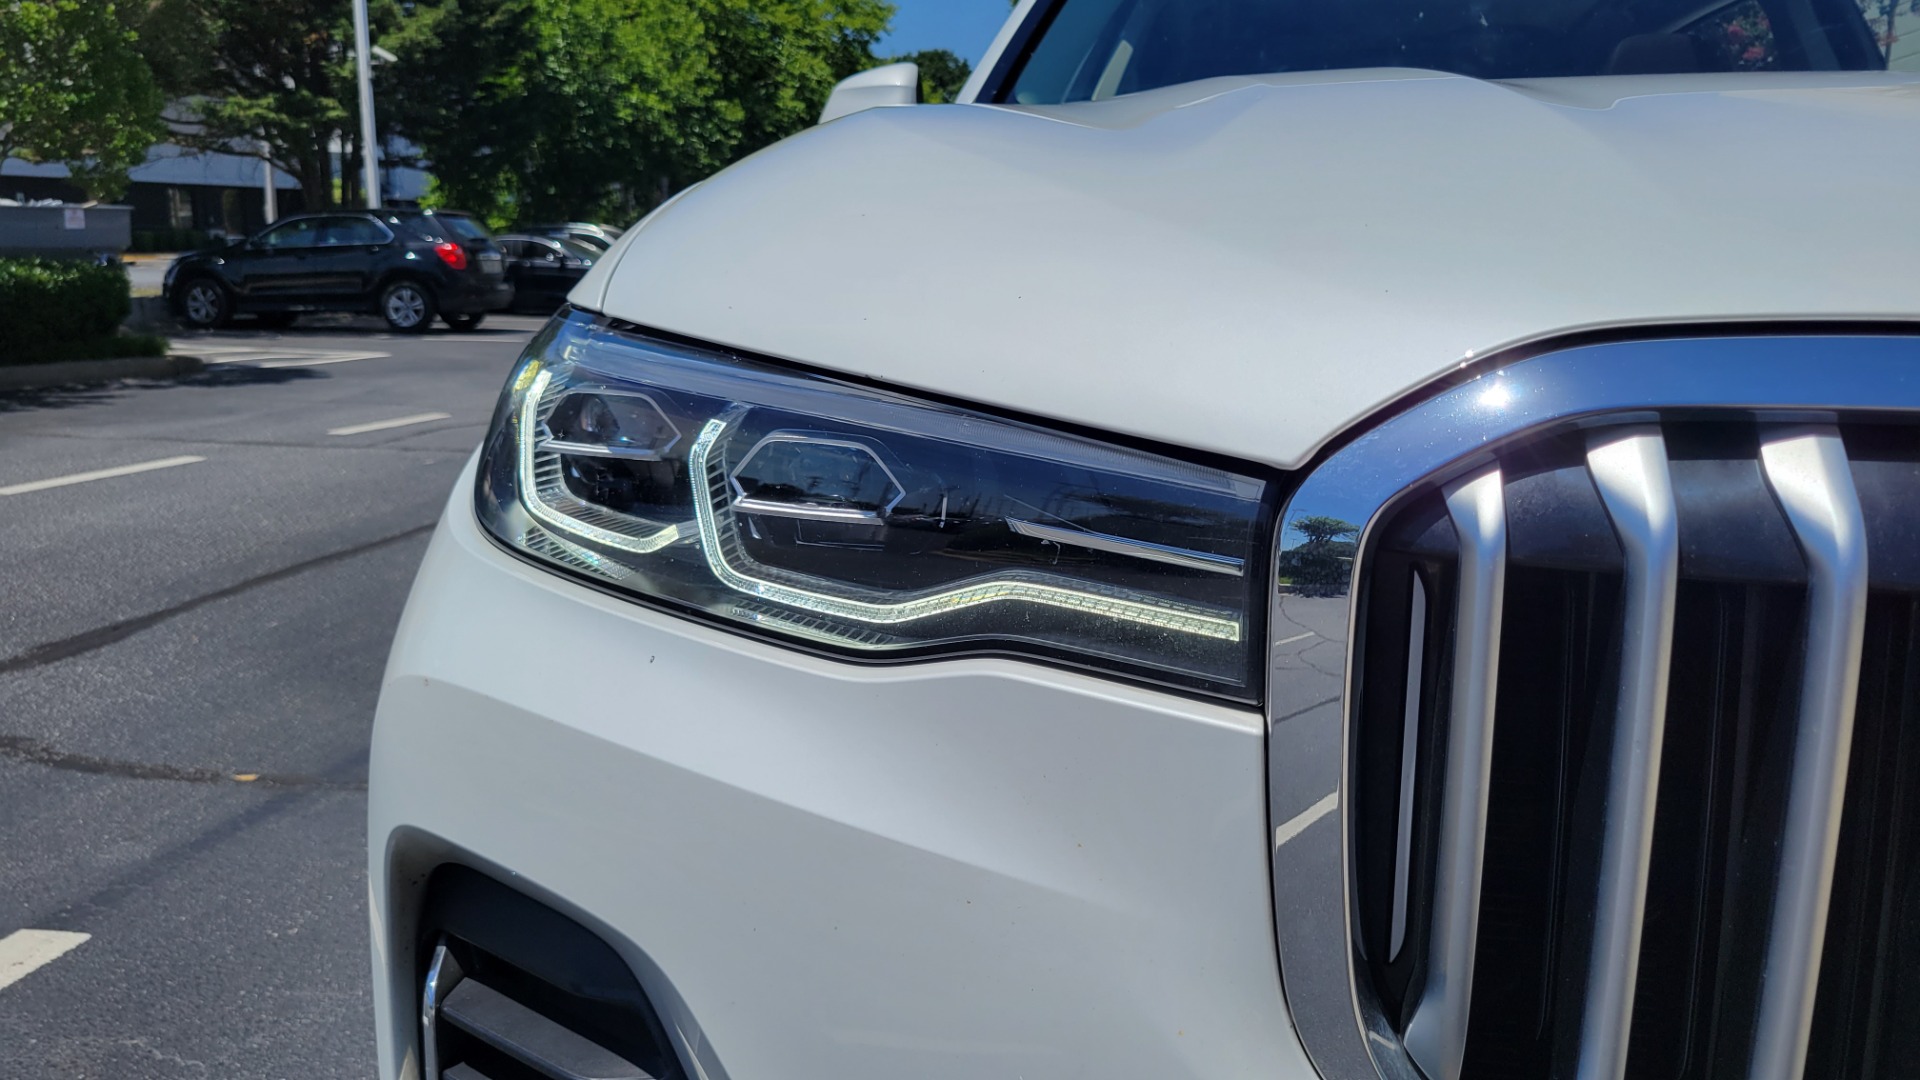 Used 2019 BMW X7 XDRIVE40I PREMIUM / NAV / HUD / PARK ASST PLUS / REMOTE START / 3D VIEW for sale Sold at Formula Imports in Charlotte NC 28227 34